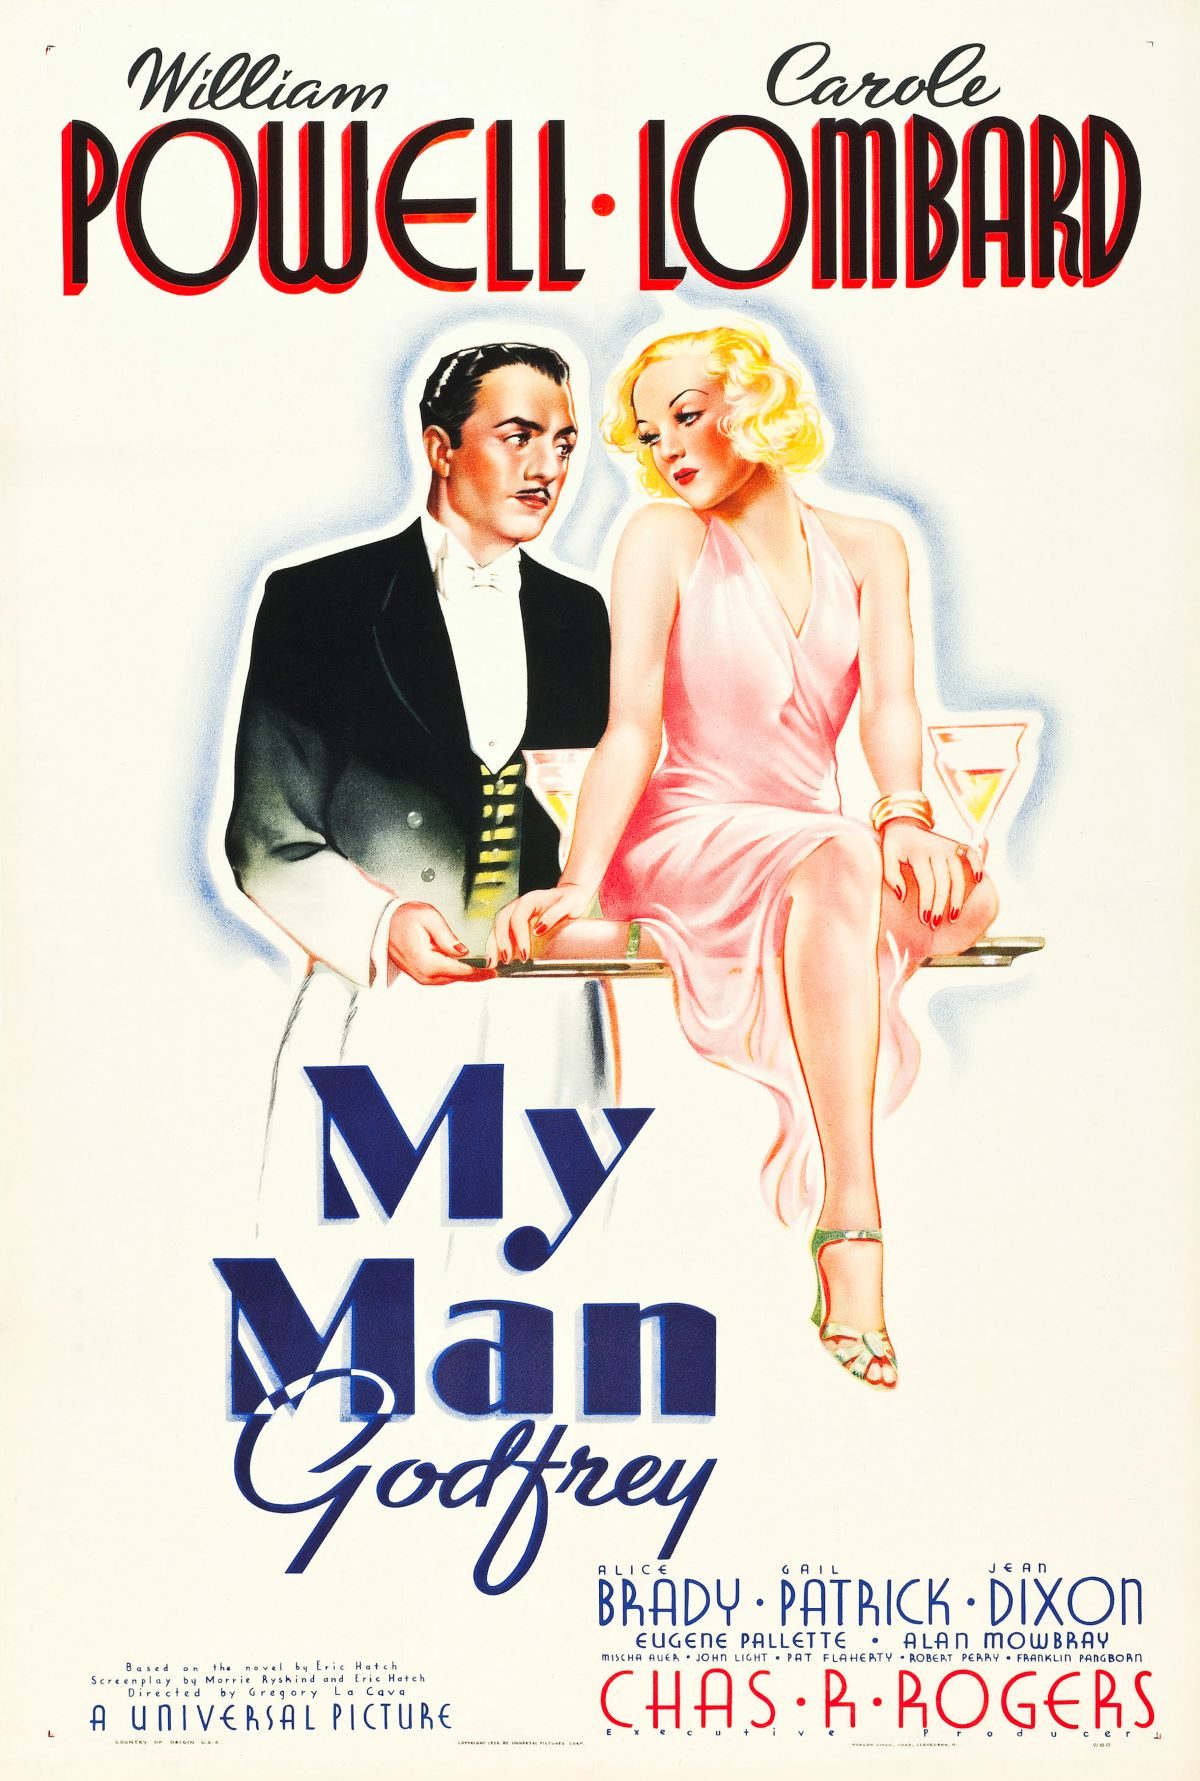 Karoly Grosz, William Powell, Carole, Lombard, movies, film, movie posters, design, film posters, art, 1930s